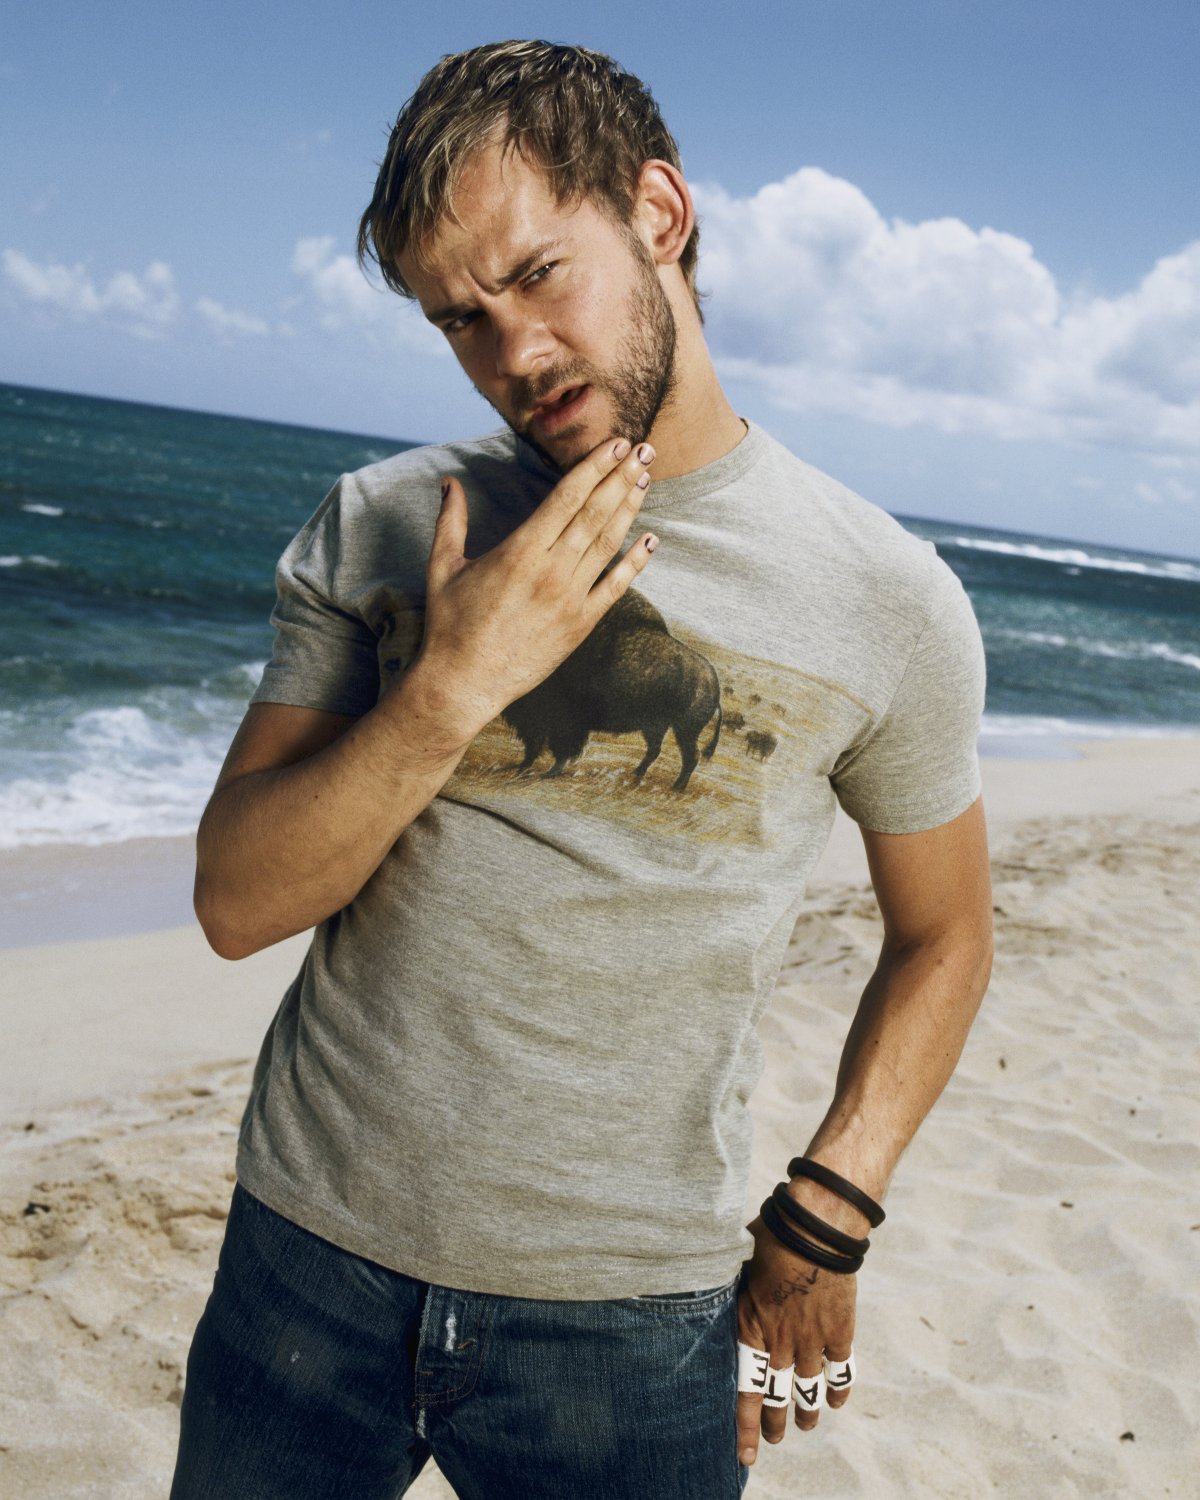 Dominic Monaghan – Charlie Pace